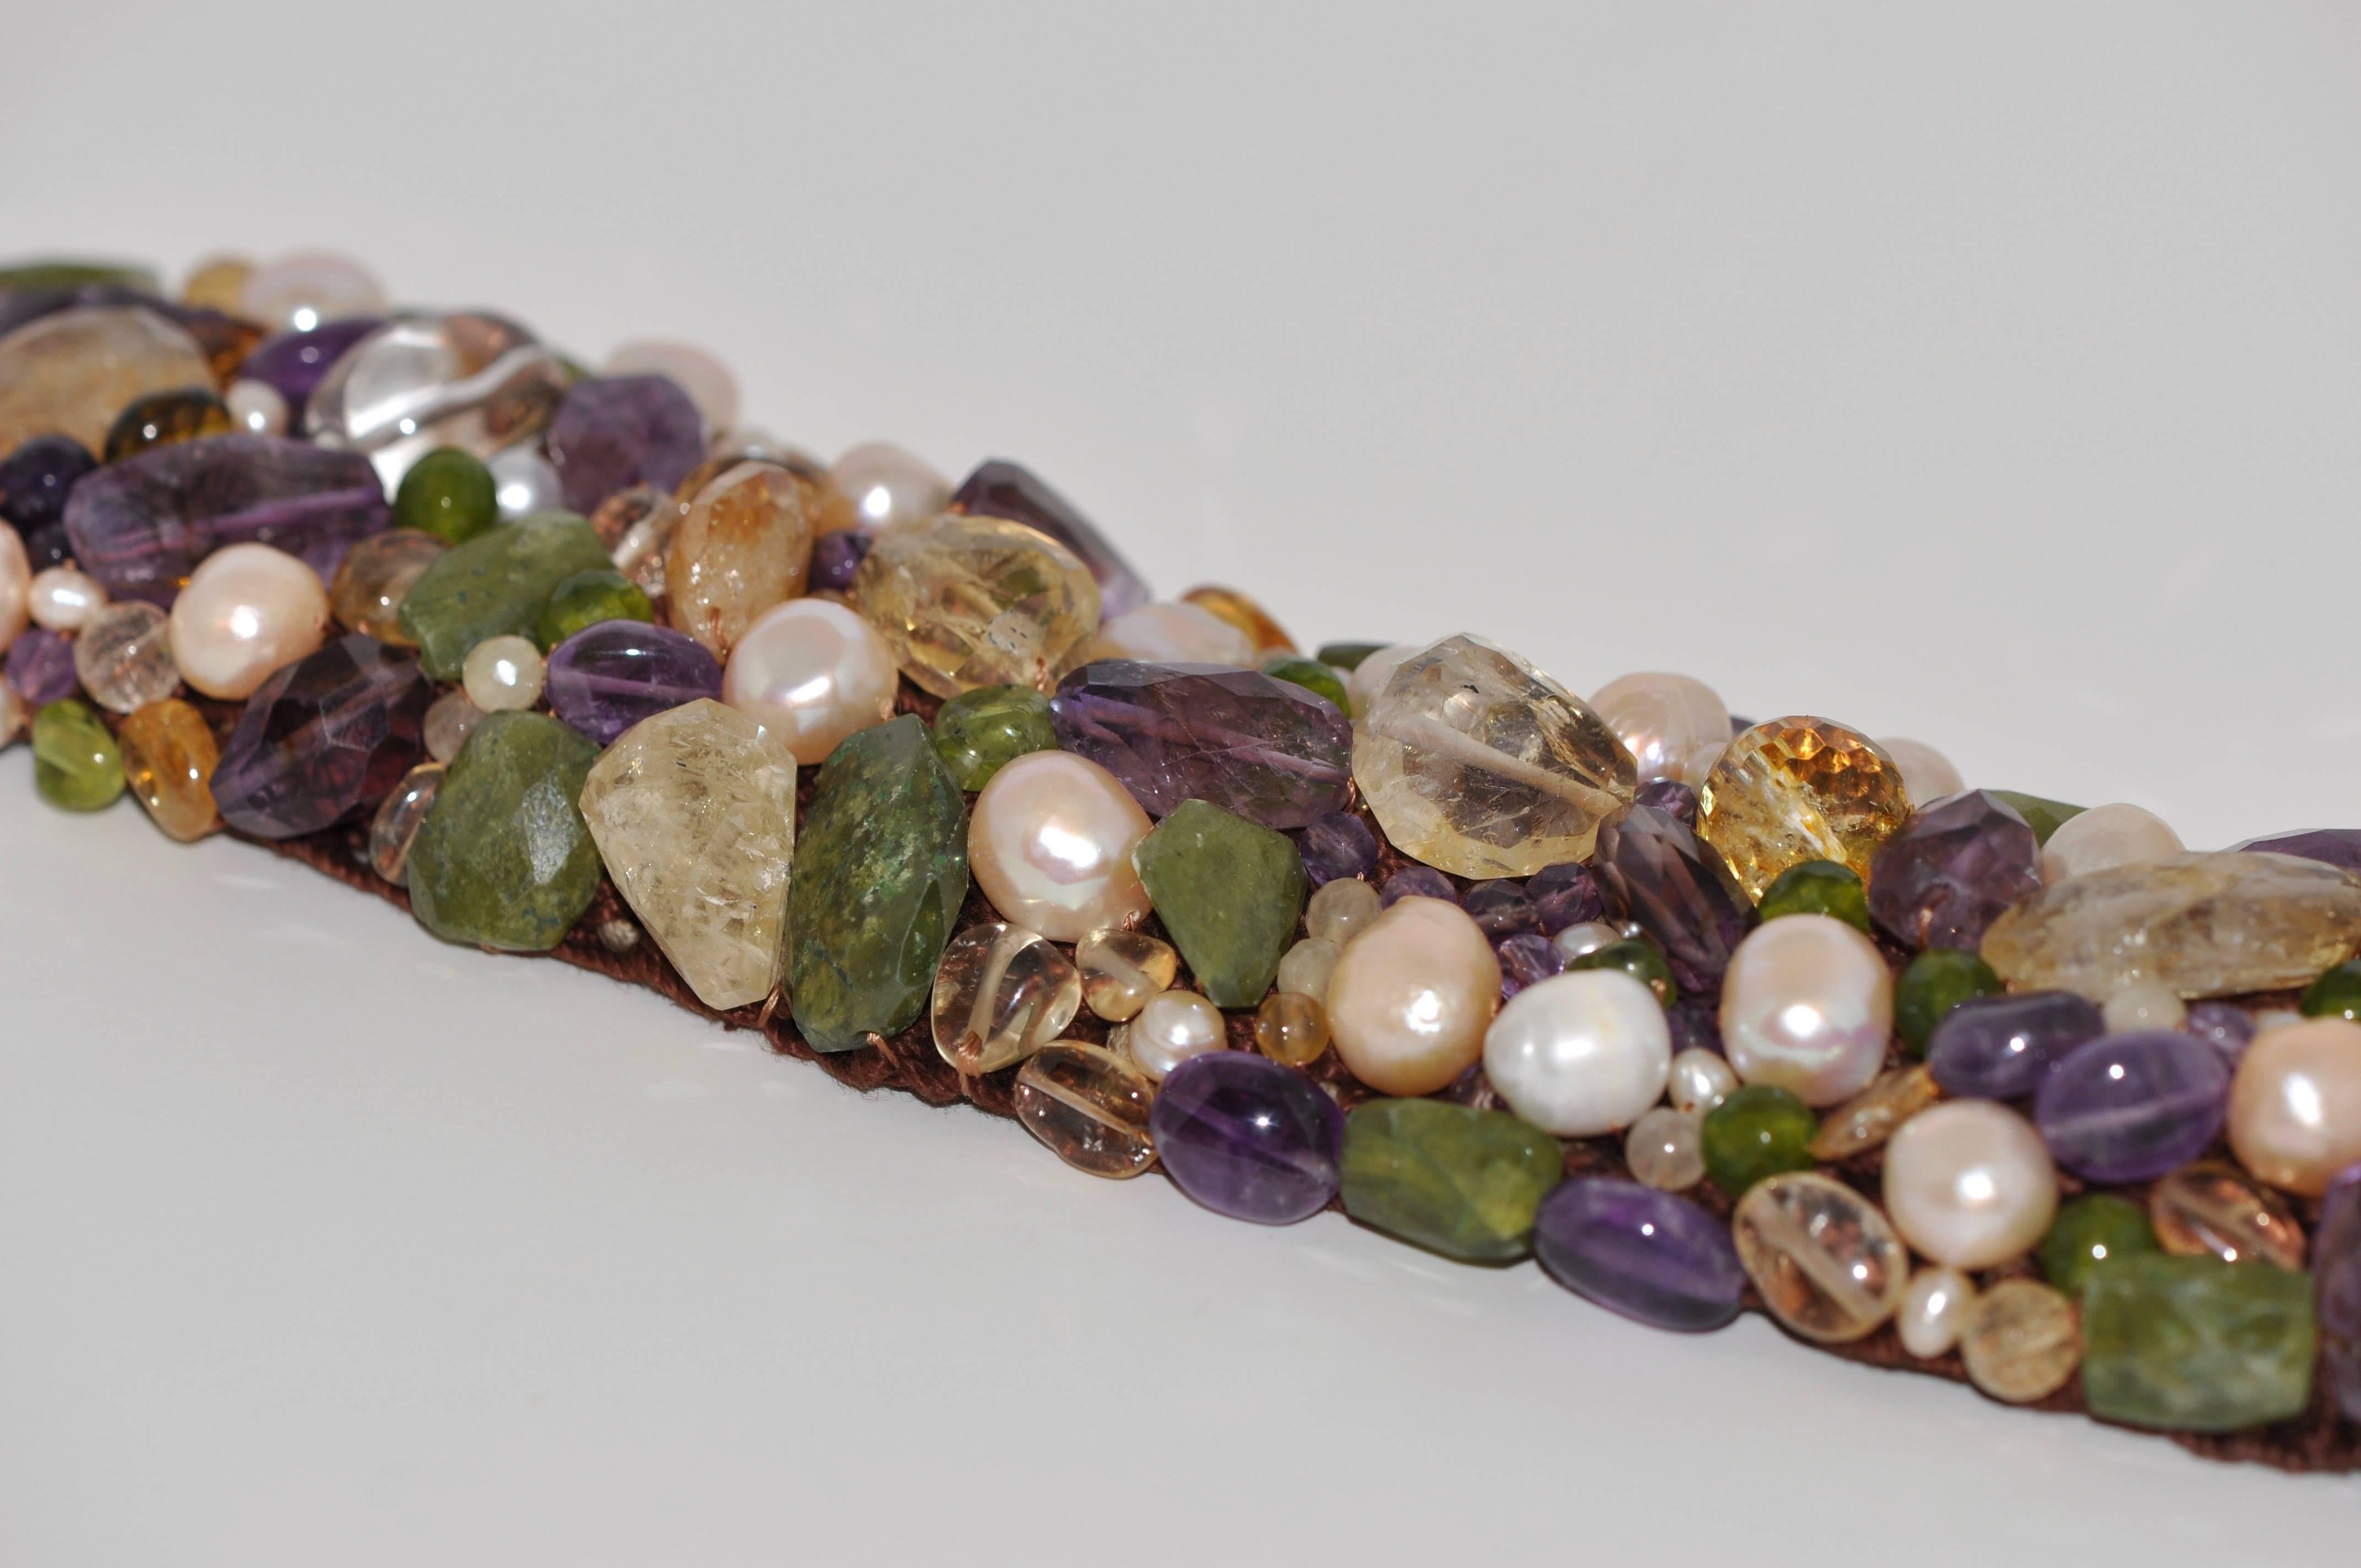 Discover this Amethyst Citrine Peridot and Freshwater Pearls Artisanal Cuff Bracelet.
Amethyst
Citrine
Peridot
Freshwater Pearls
This Cuff Bracelet is handmade.